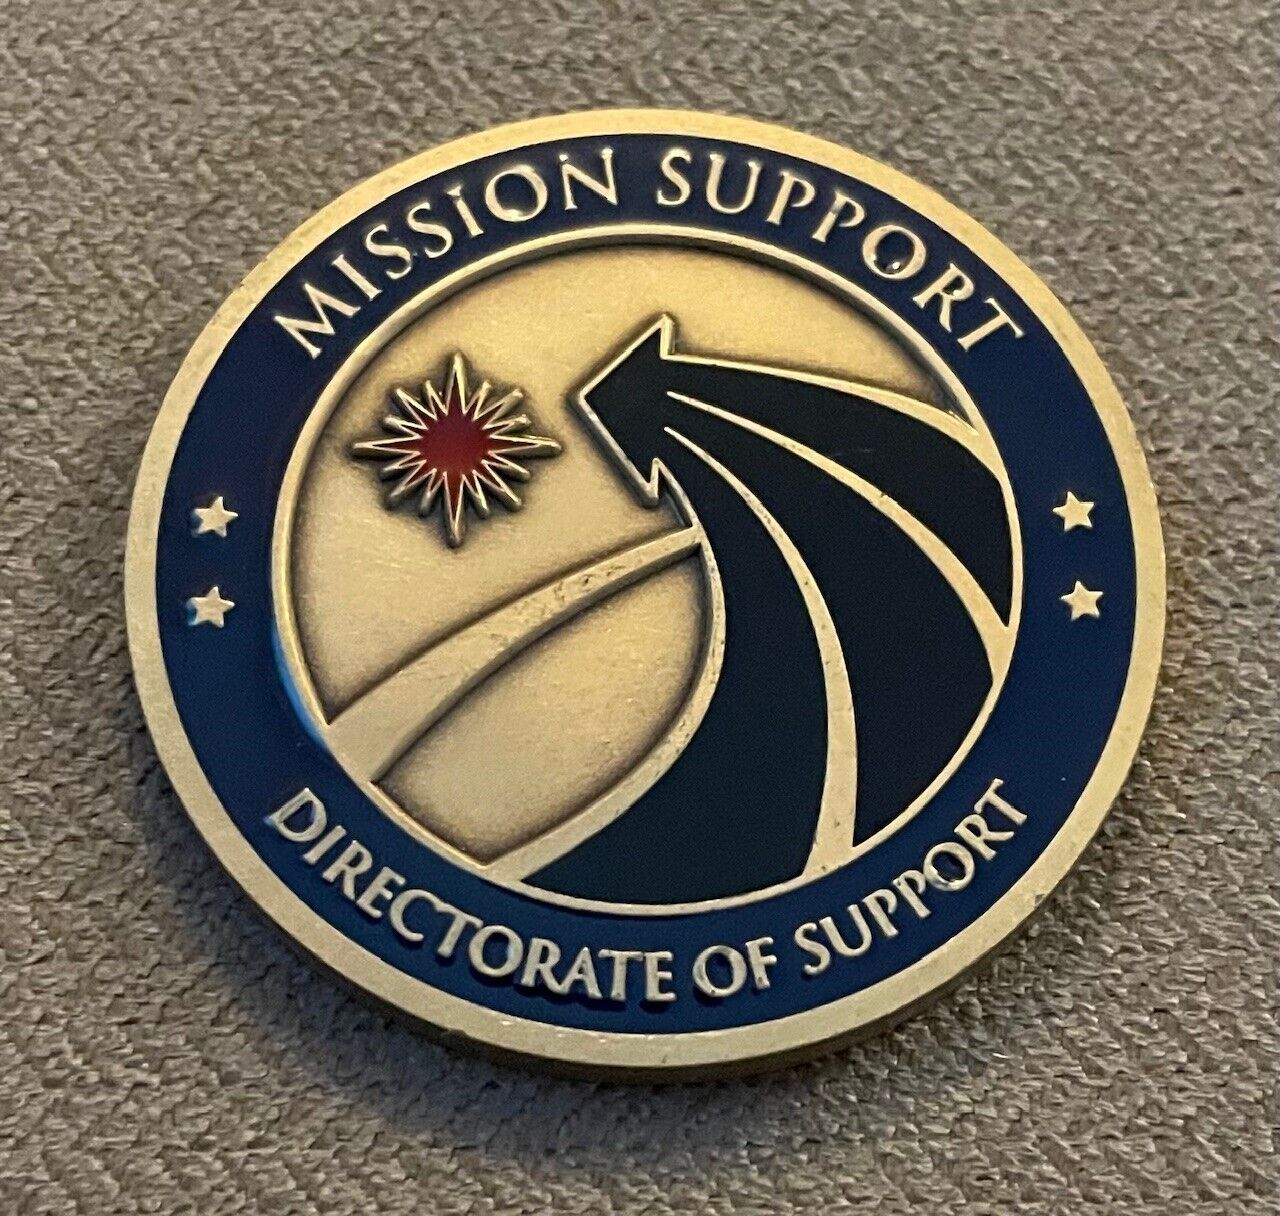 CIA Directorate of Support Global Services Mission Support challenge coin